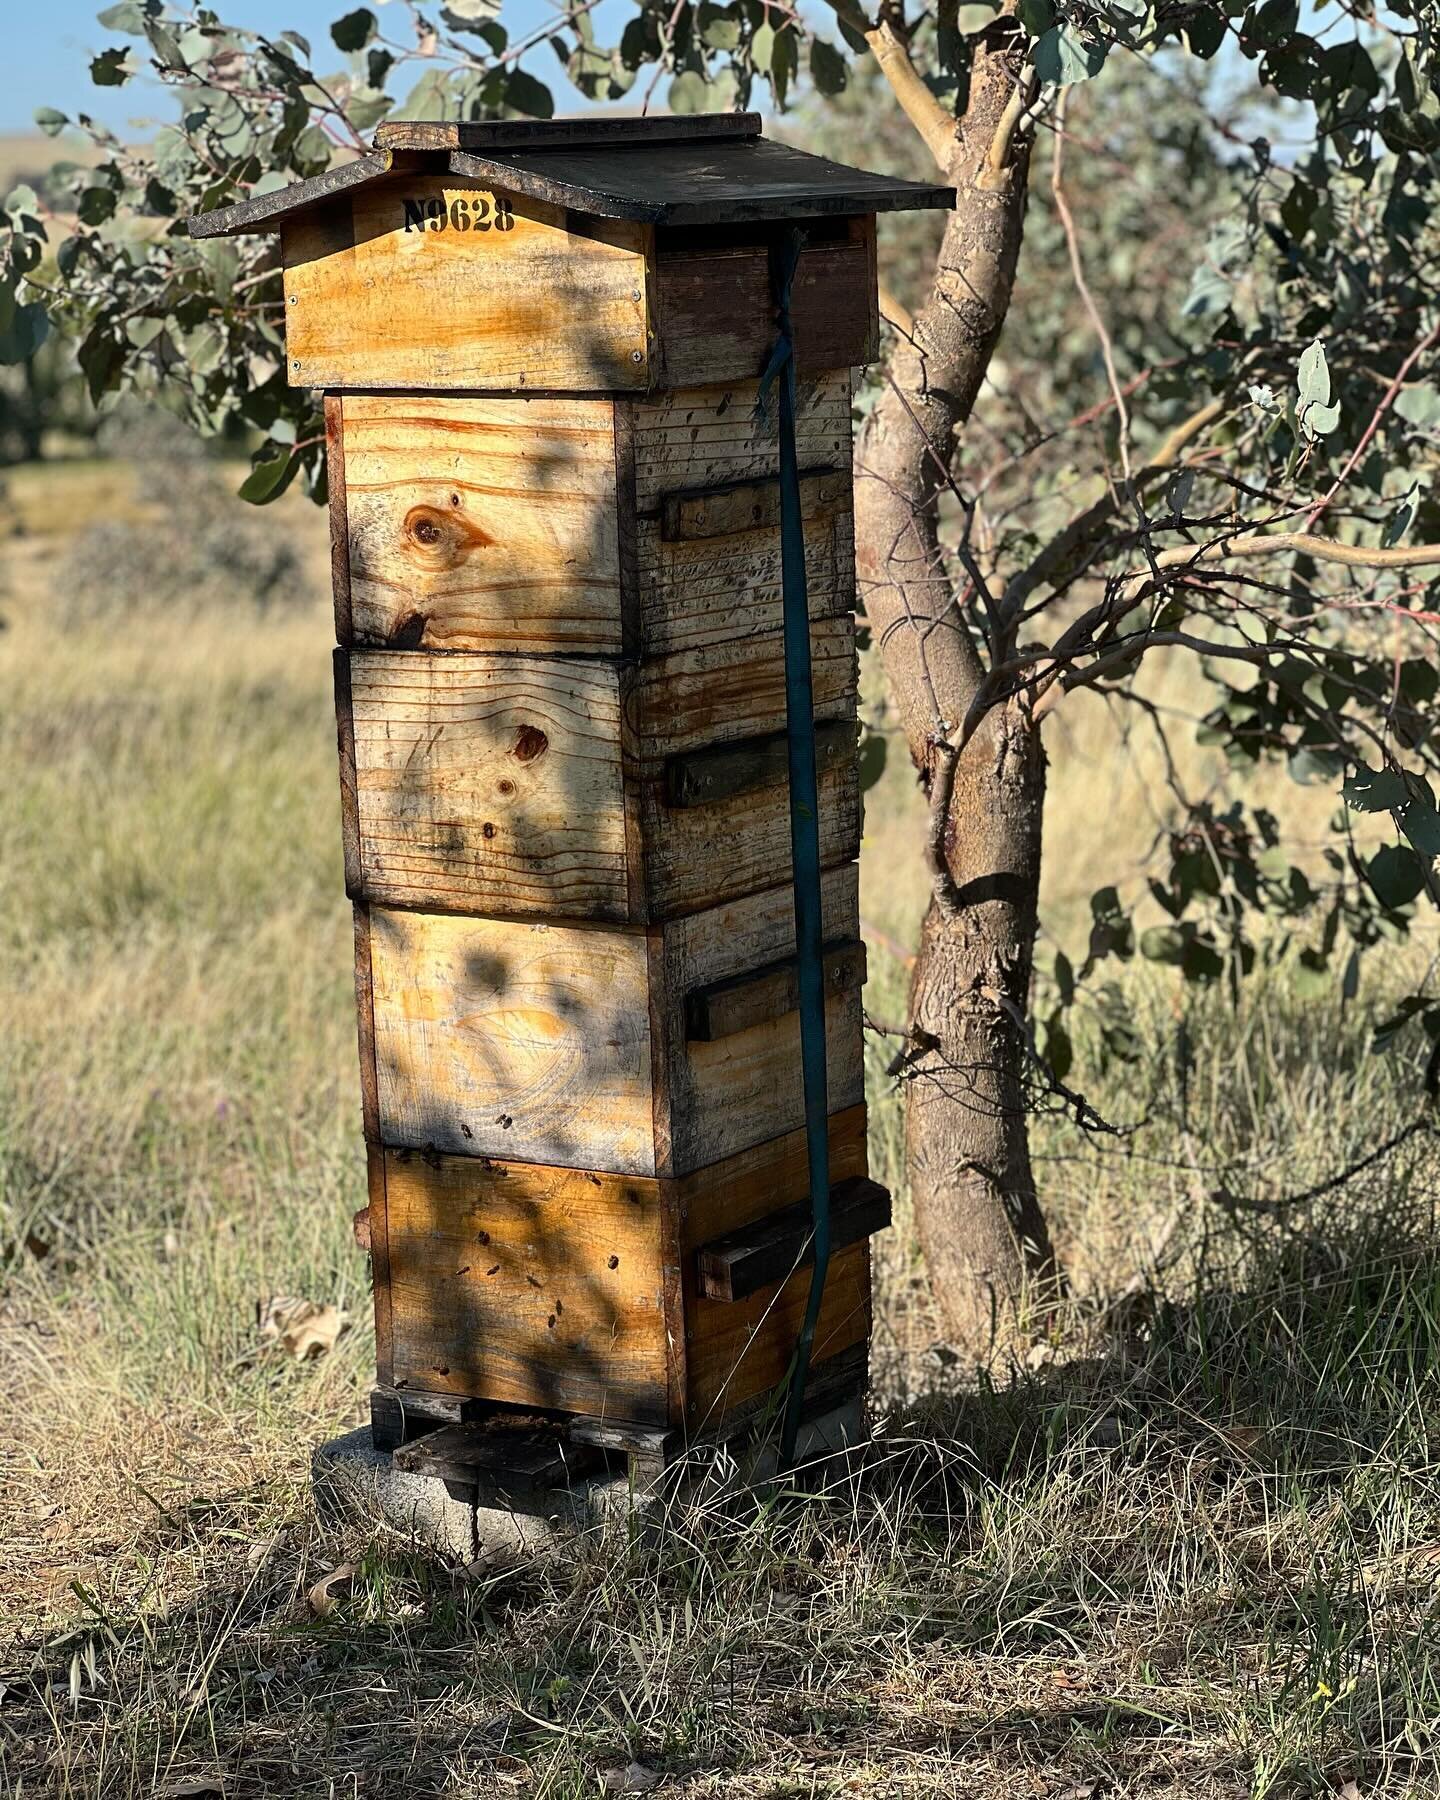 Oakley, up in the hills near #Bethungra, is a place of exceptional beauty and biodiversity. Each hive is shaded and sheltered by a white box sapling. Nearby grevillea shrubs offer nectar, and bees find water in the farm dam downhill. 

#biodiversity 